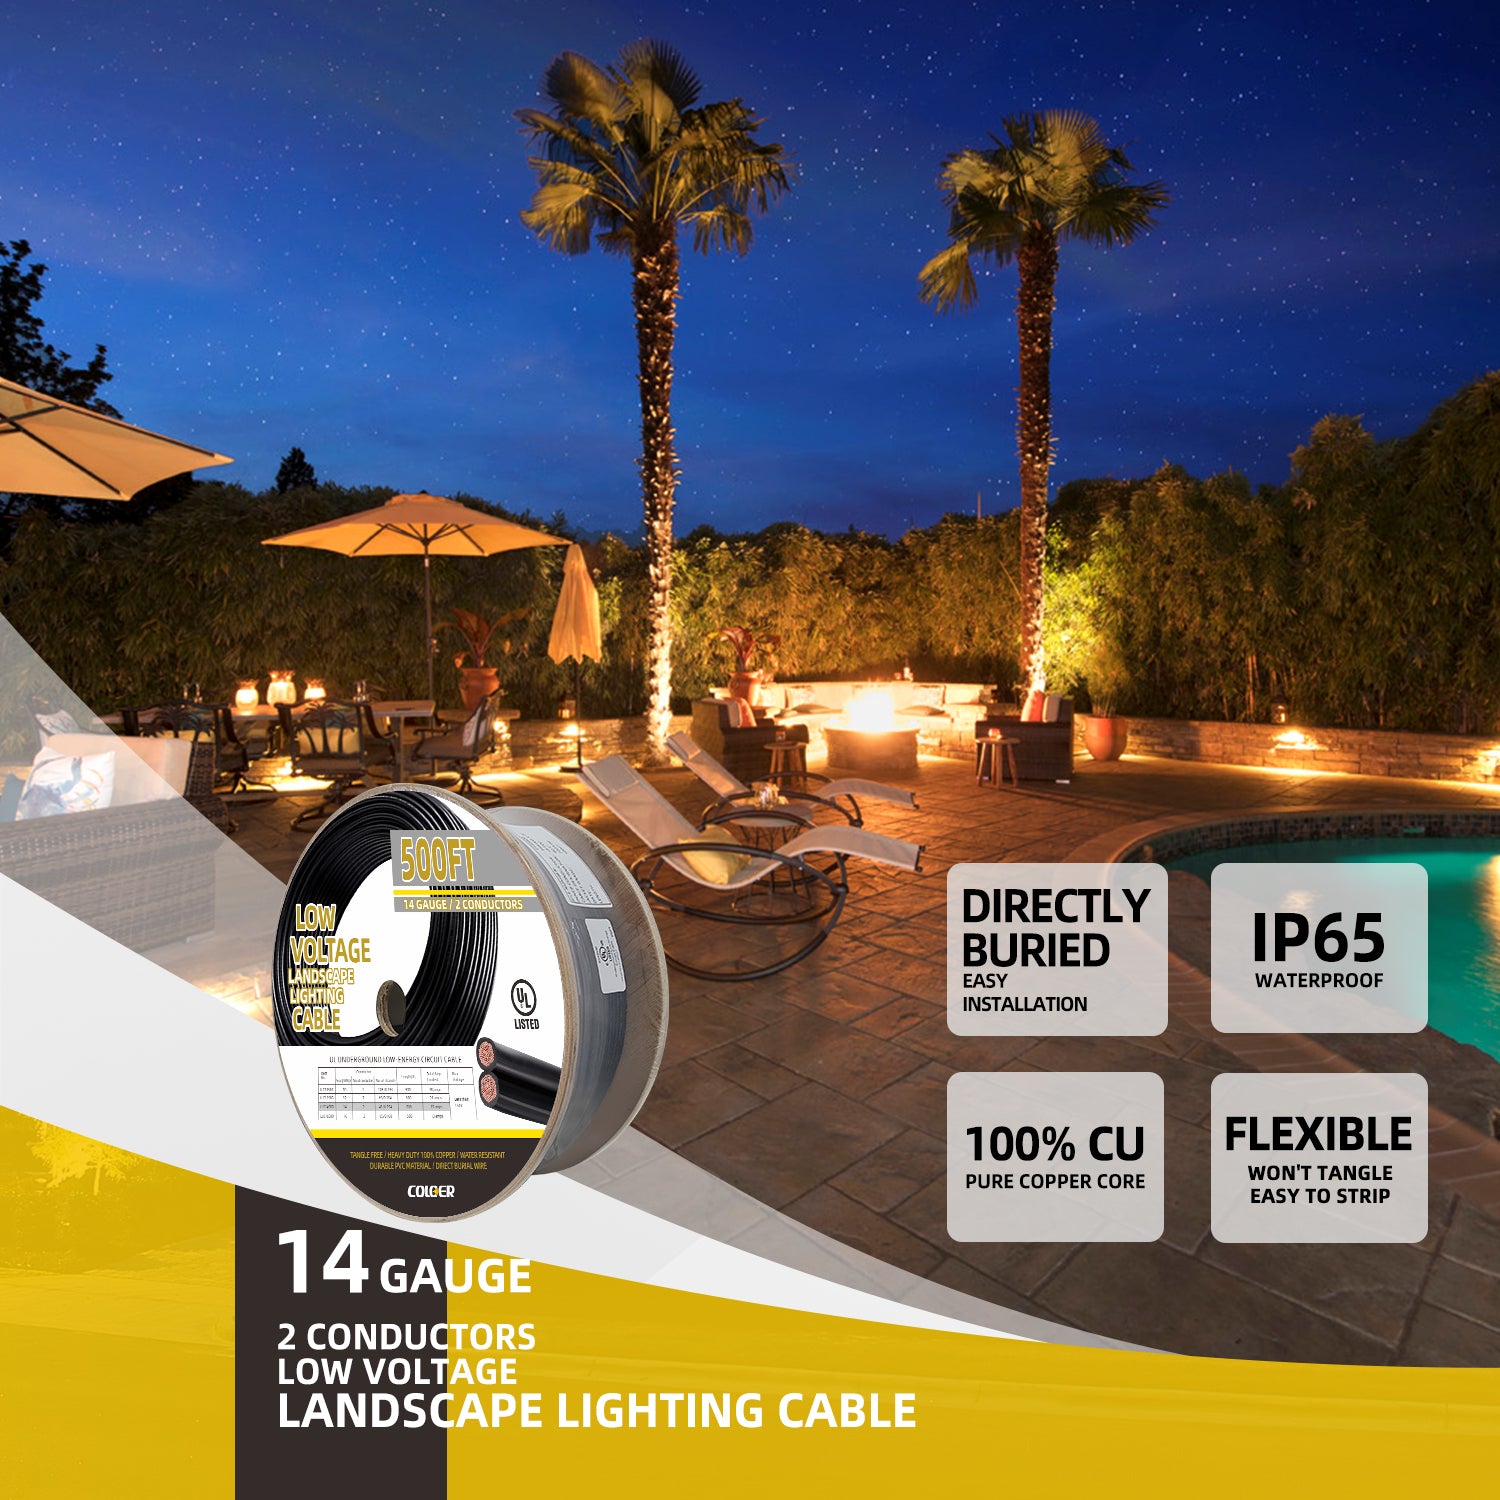 14 gauge low voltage landscape lighting cable by COLOER, 500ft length, 2 conductors, 100% pure copper core, flexible, IP65 waterproof and easy installation, shown by an illuminated outdoor area with poolside lounge chairs and palm trees.